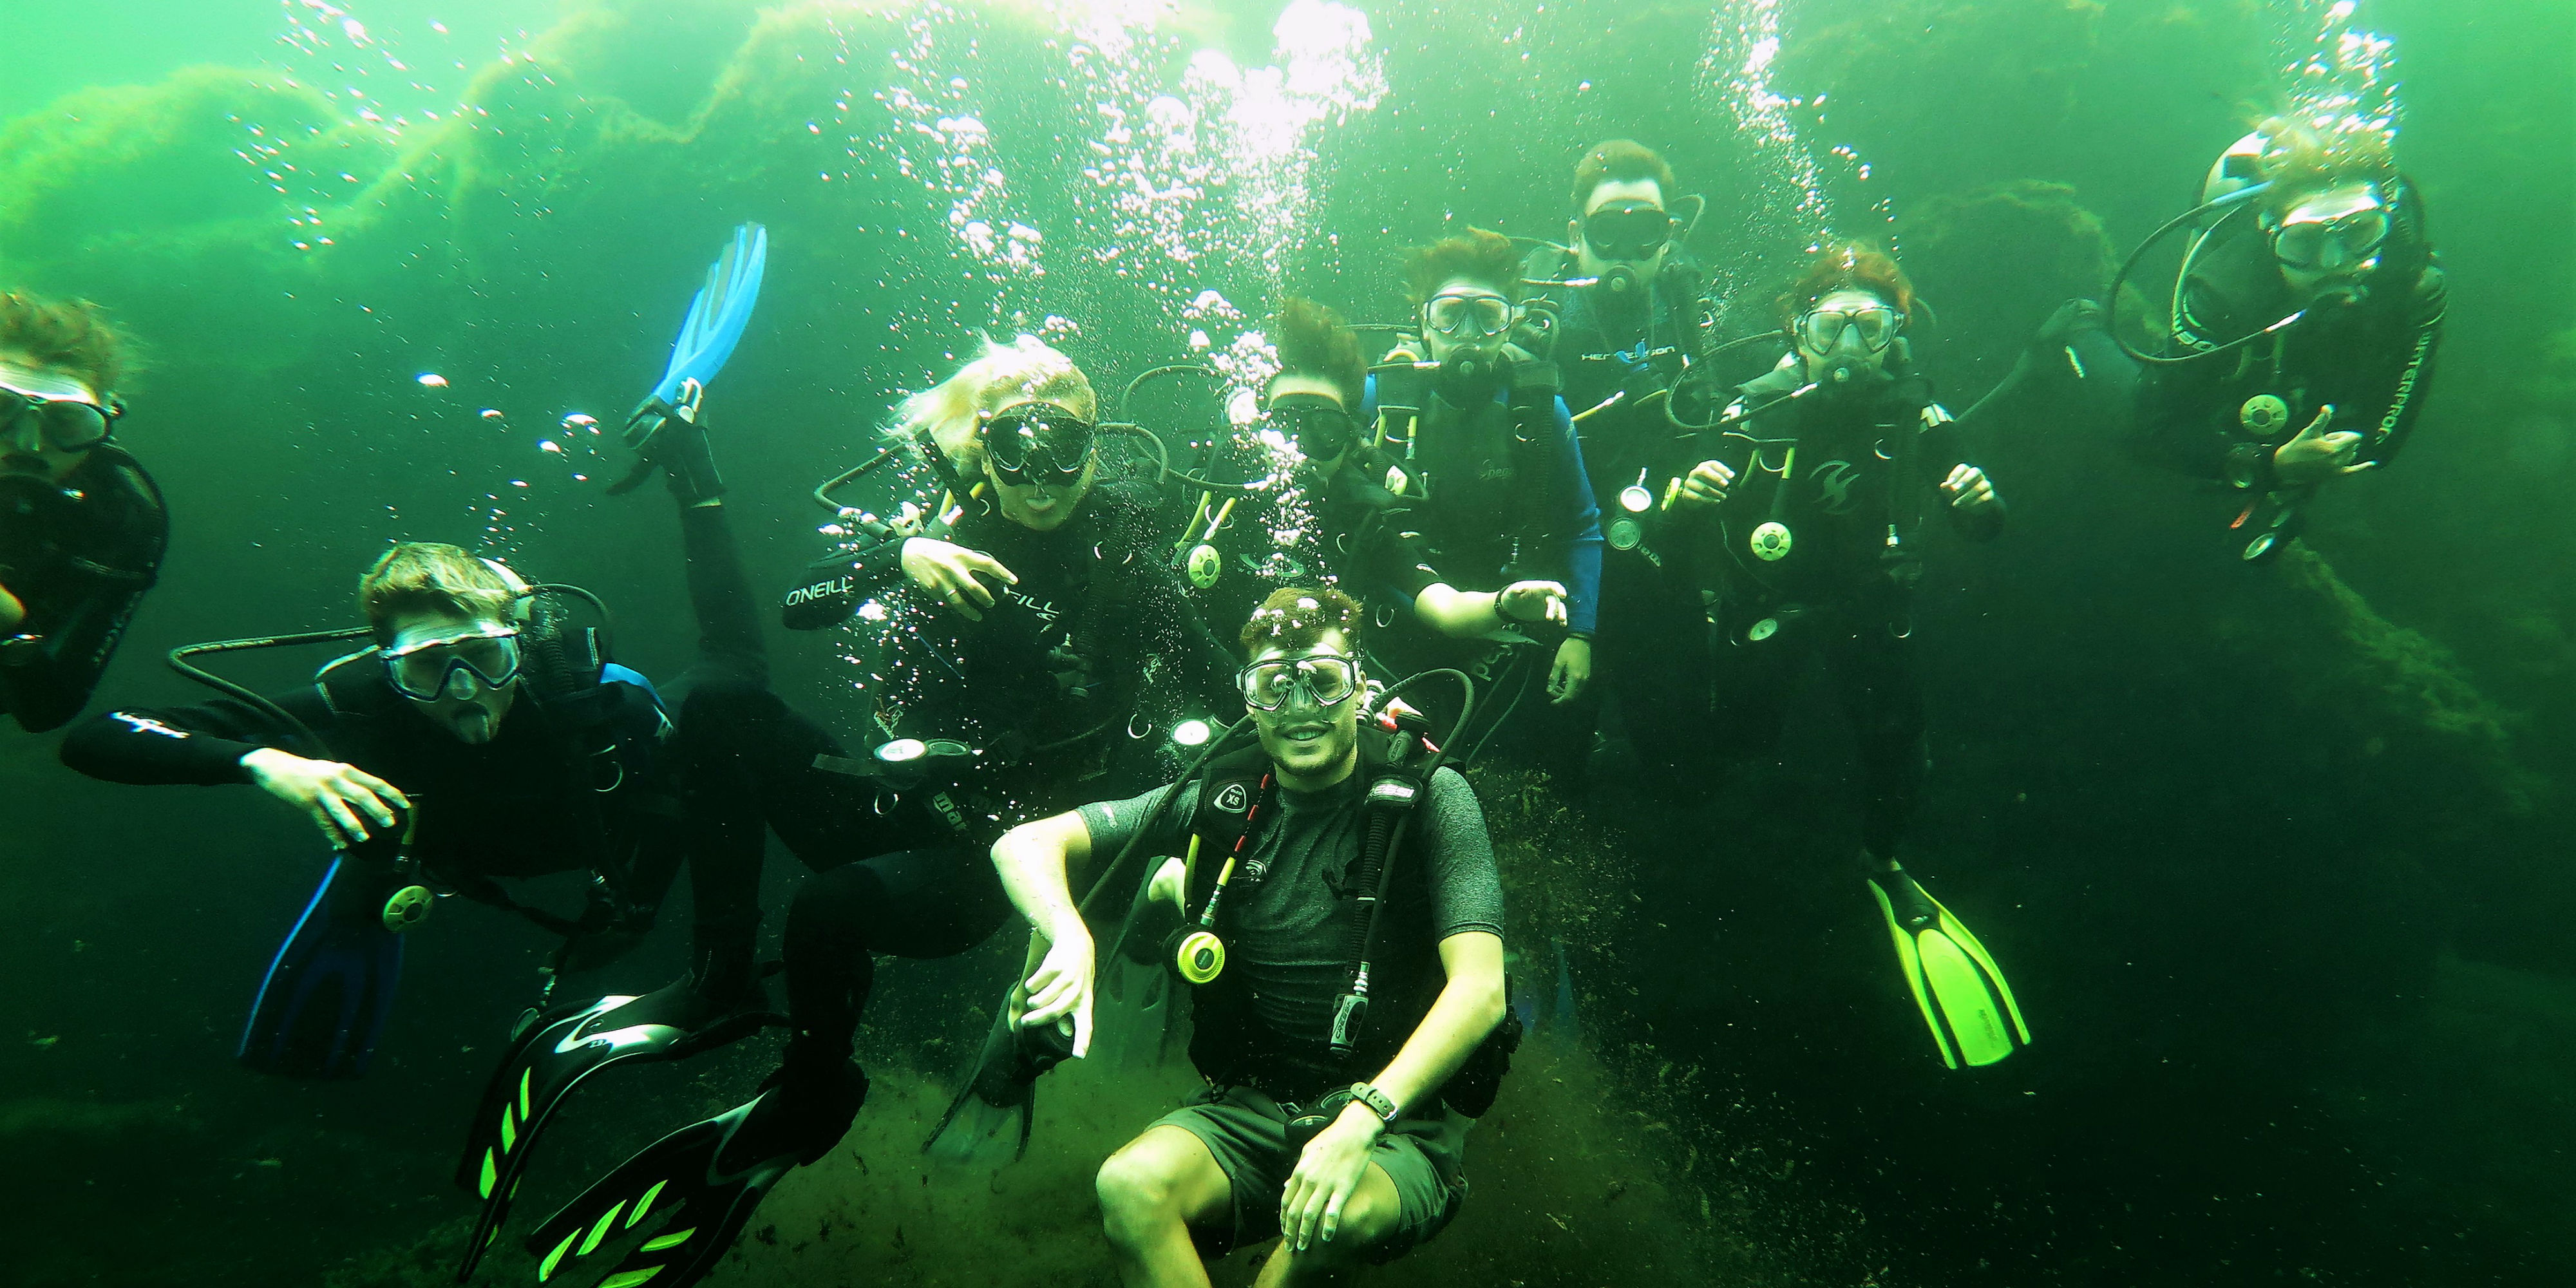 GVI participants complete mandatory dives as part of their PADI diving qualification, while working on marine conservation in Mexico.